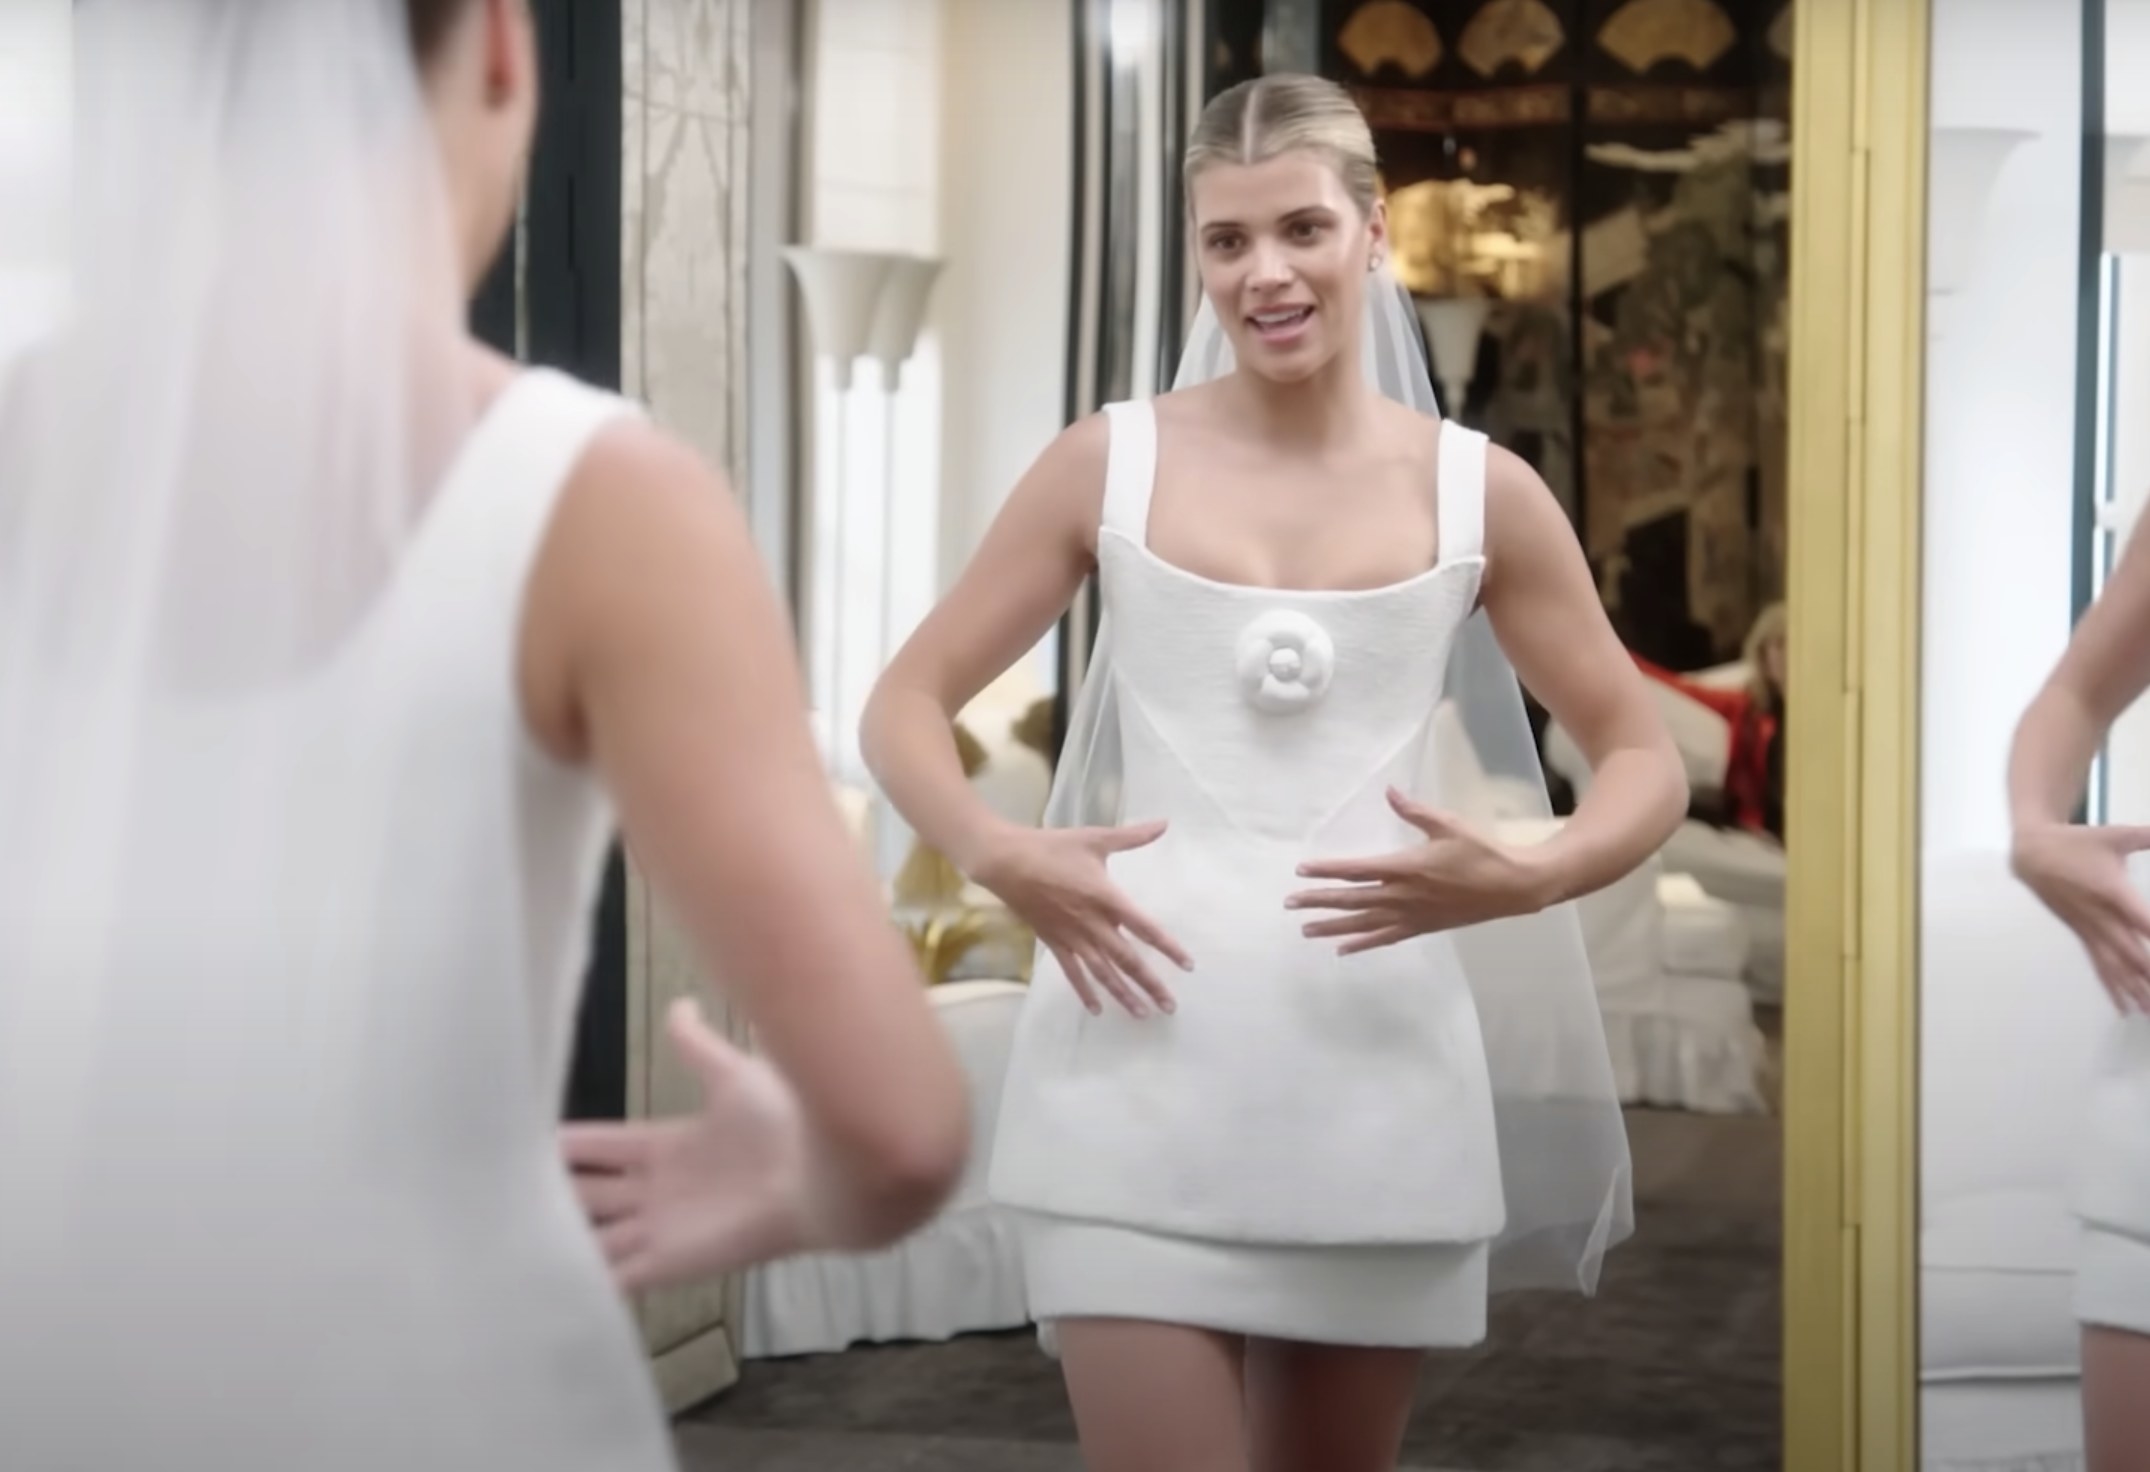 Sofia Richie's Wedding Outfits Are Going Viral